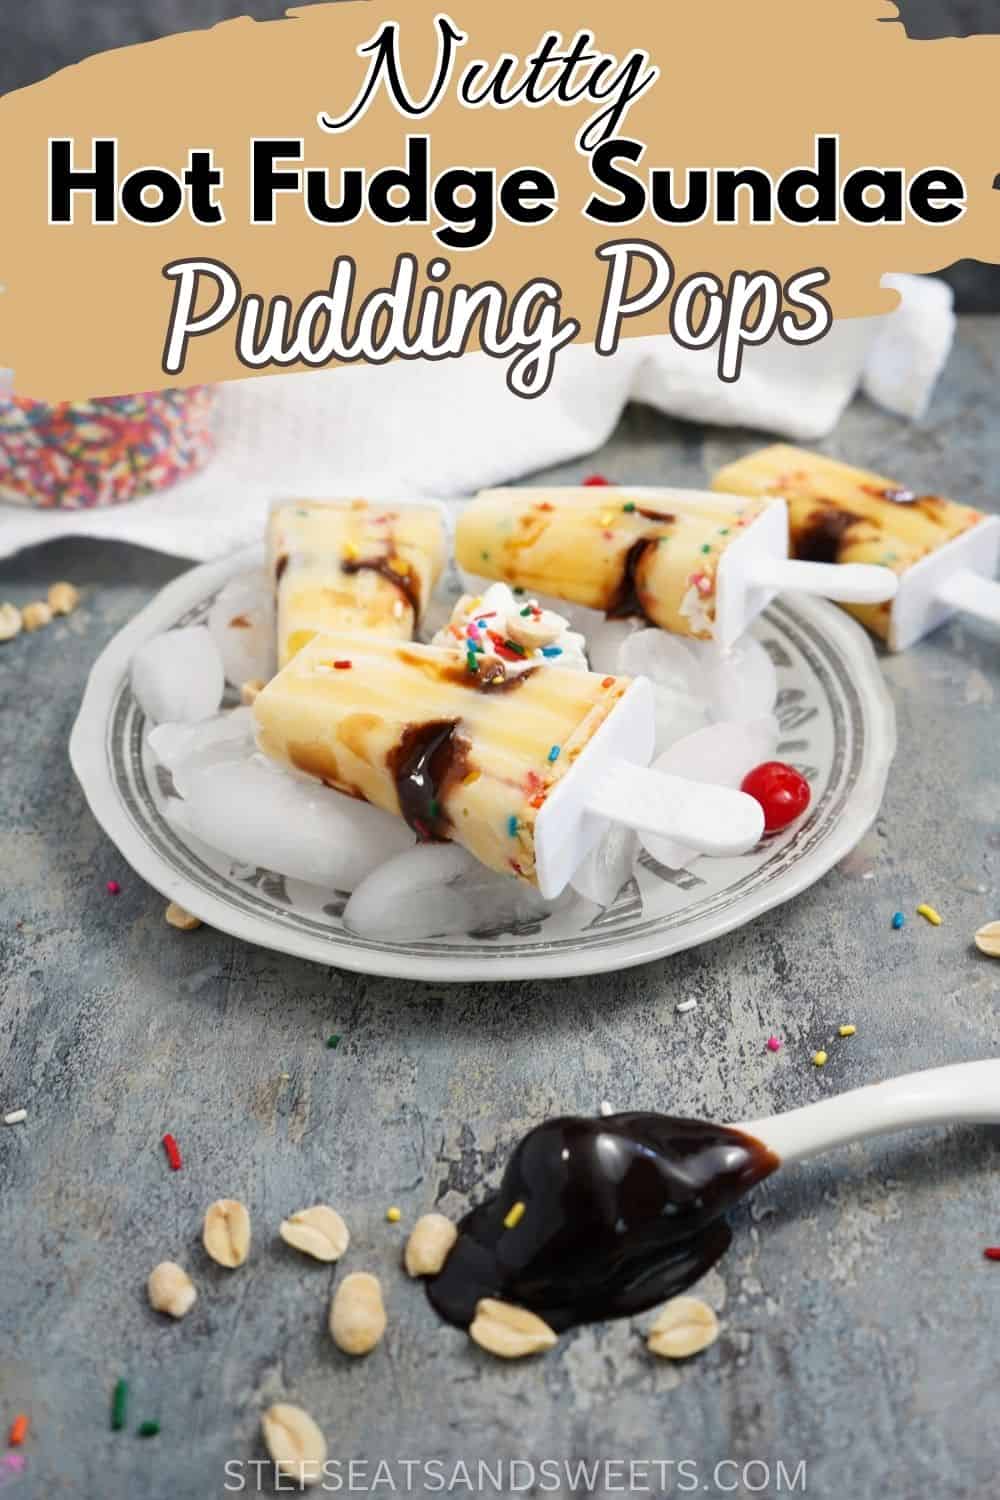 Pudding Pops with hot fudge and nuts